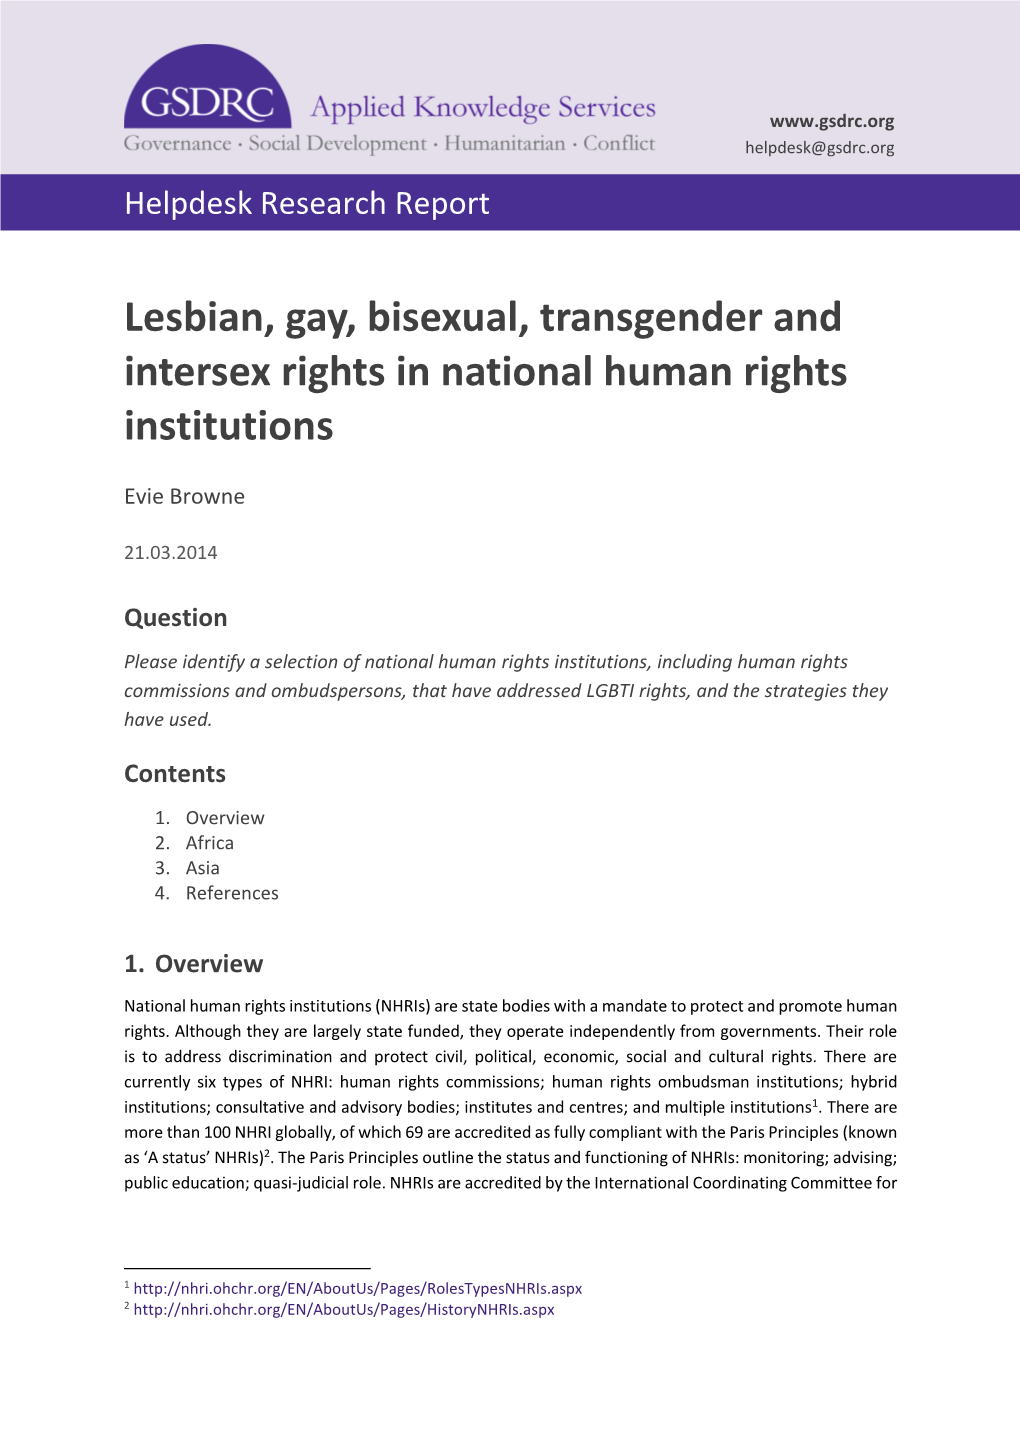 Lesbian, Gay, Bisexual, Transgender and Intersex Rights in National Human Rights Institutions